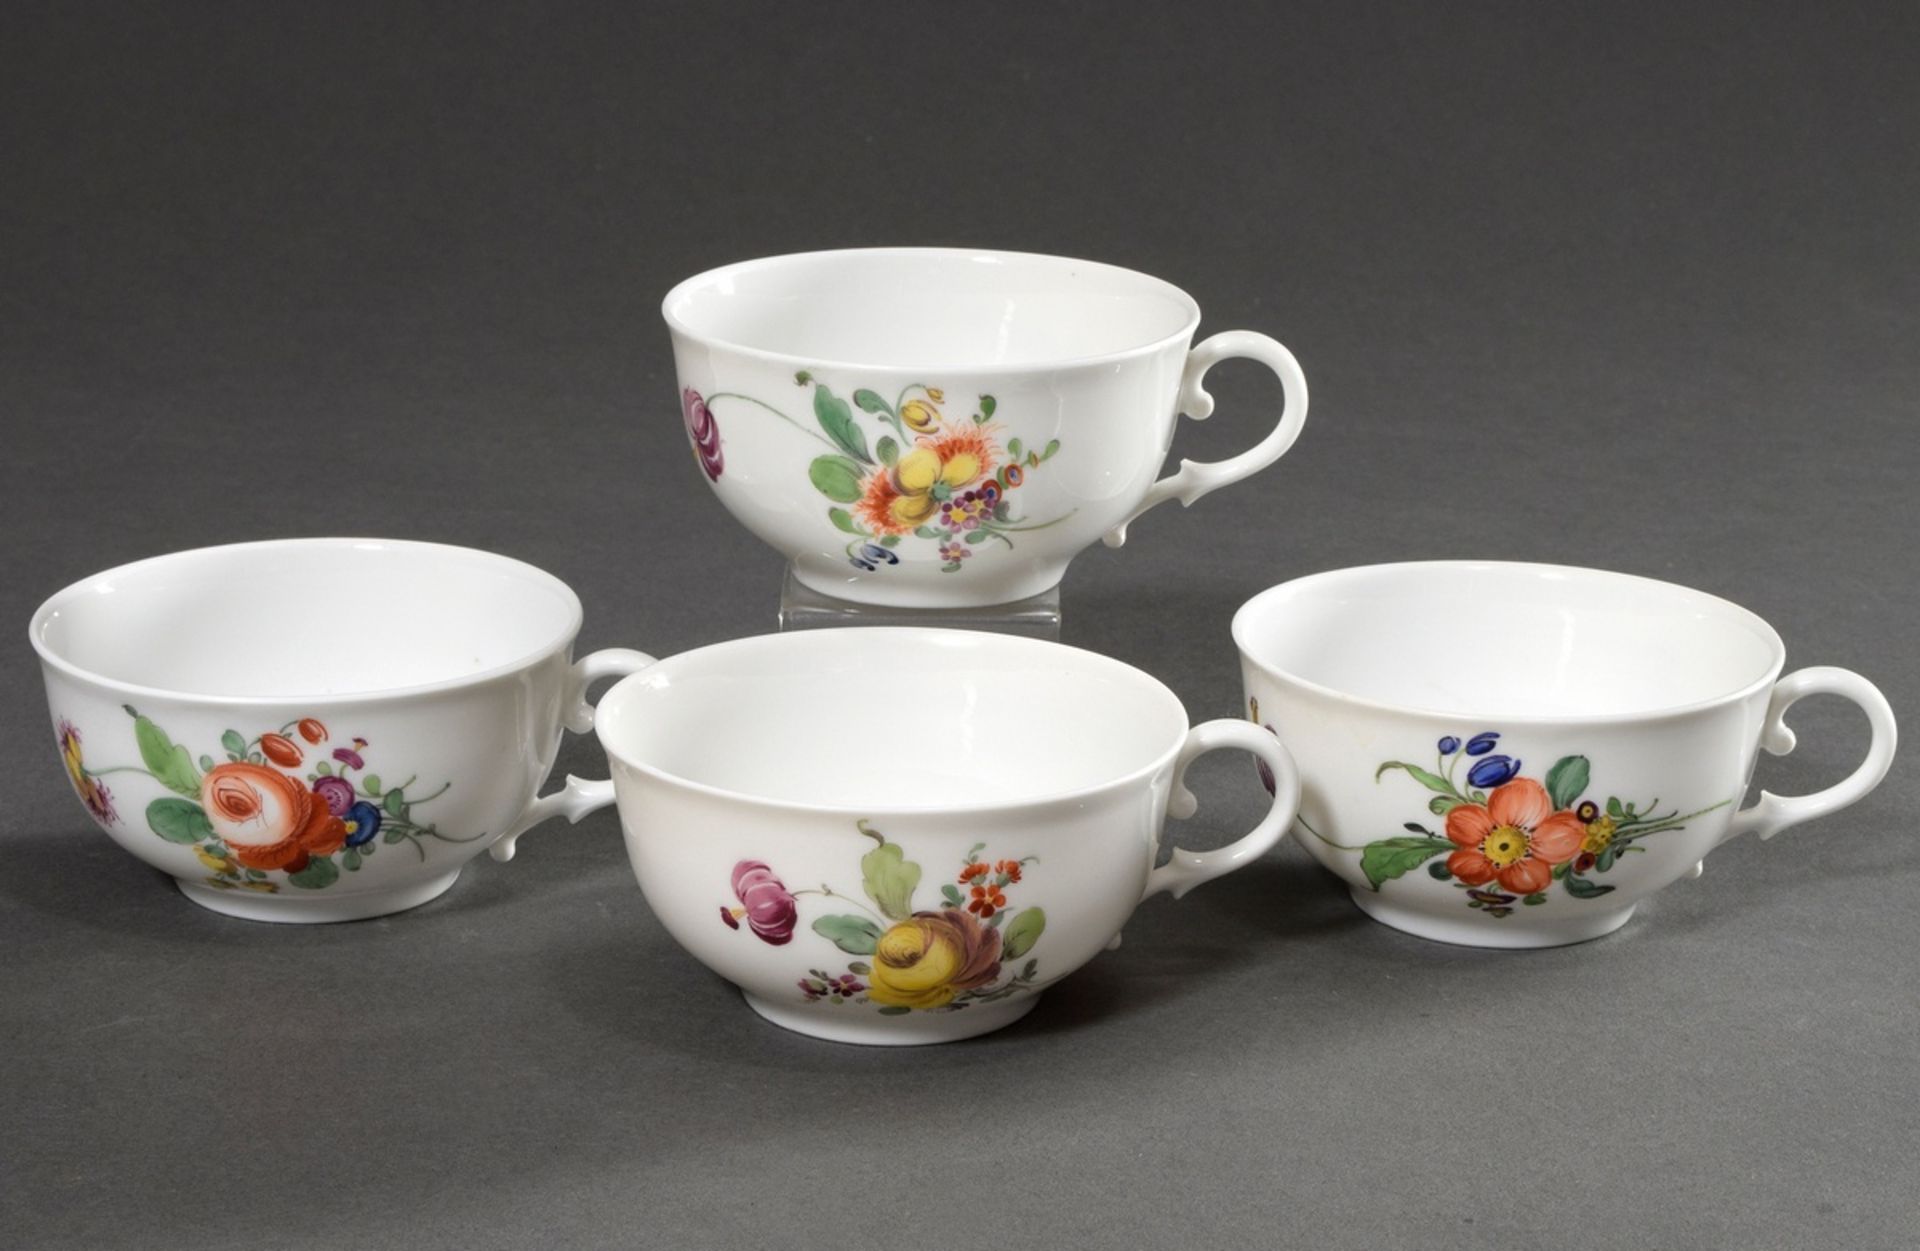 39 piece Nymphenburg coffee-tea service "Flower", 20th century, consisting of: 1 teapot with plasti - Image 4 of 4